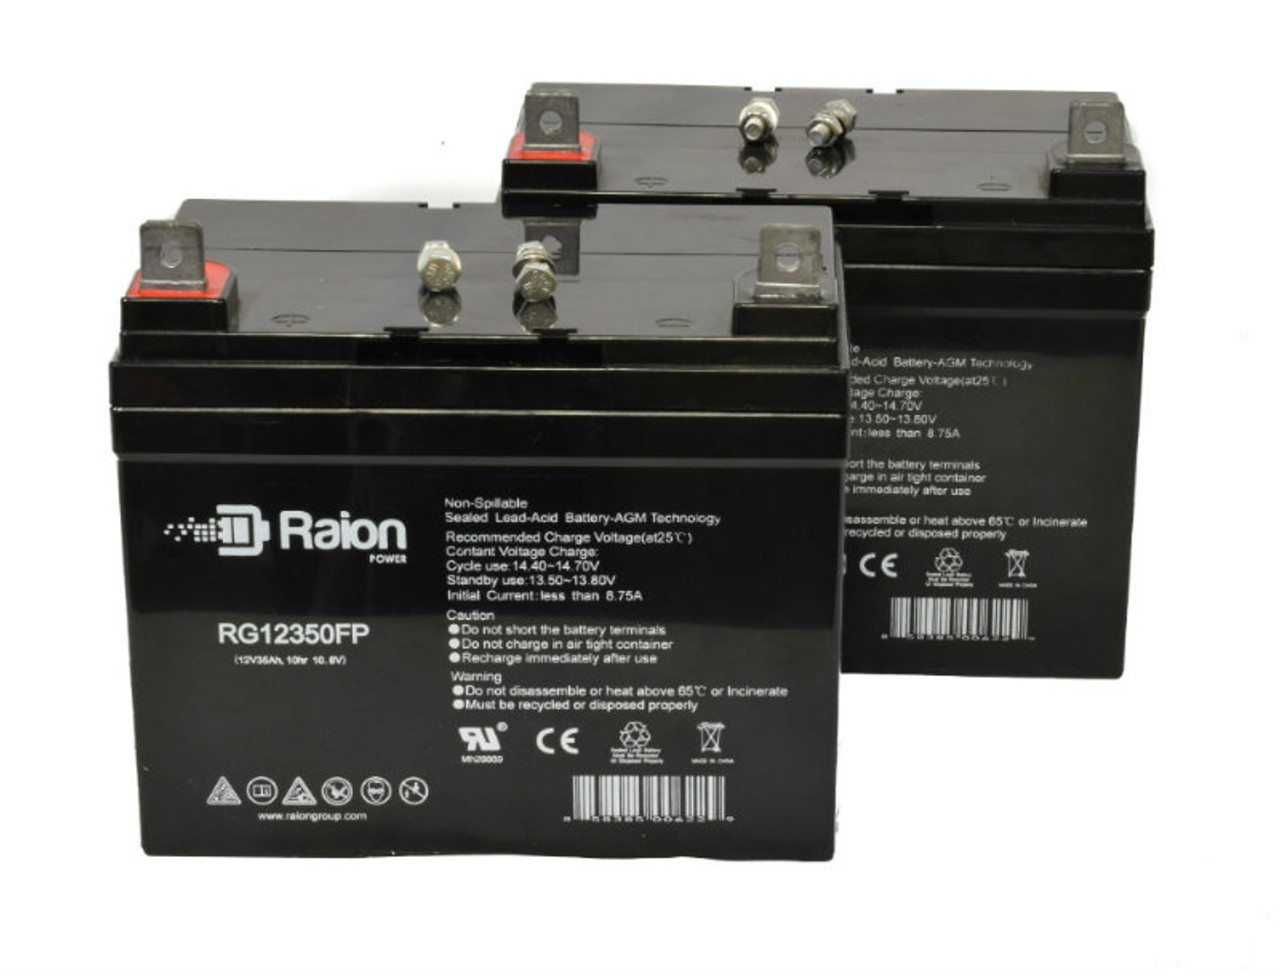 Raion Power Replacement 12V 35Ah Lawn Mower Battery for Agco Allis ZT14H - 2 Pack